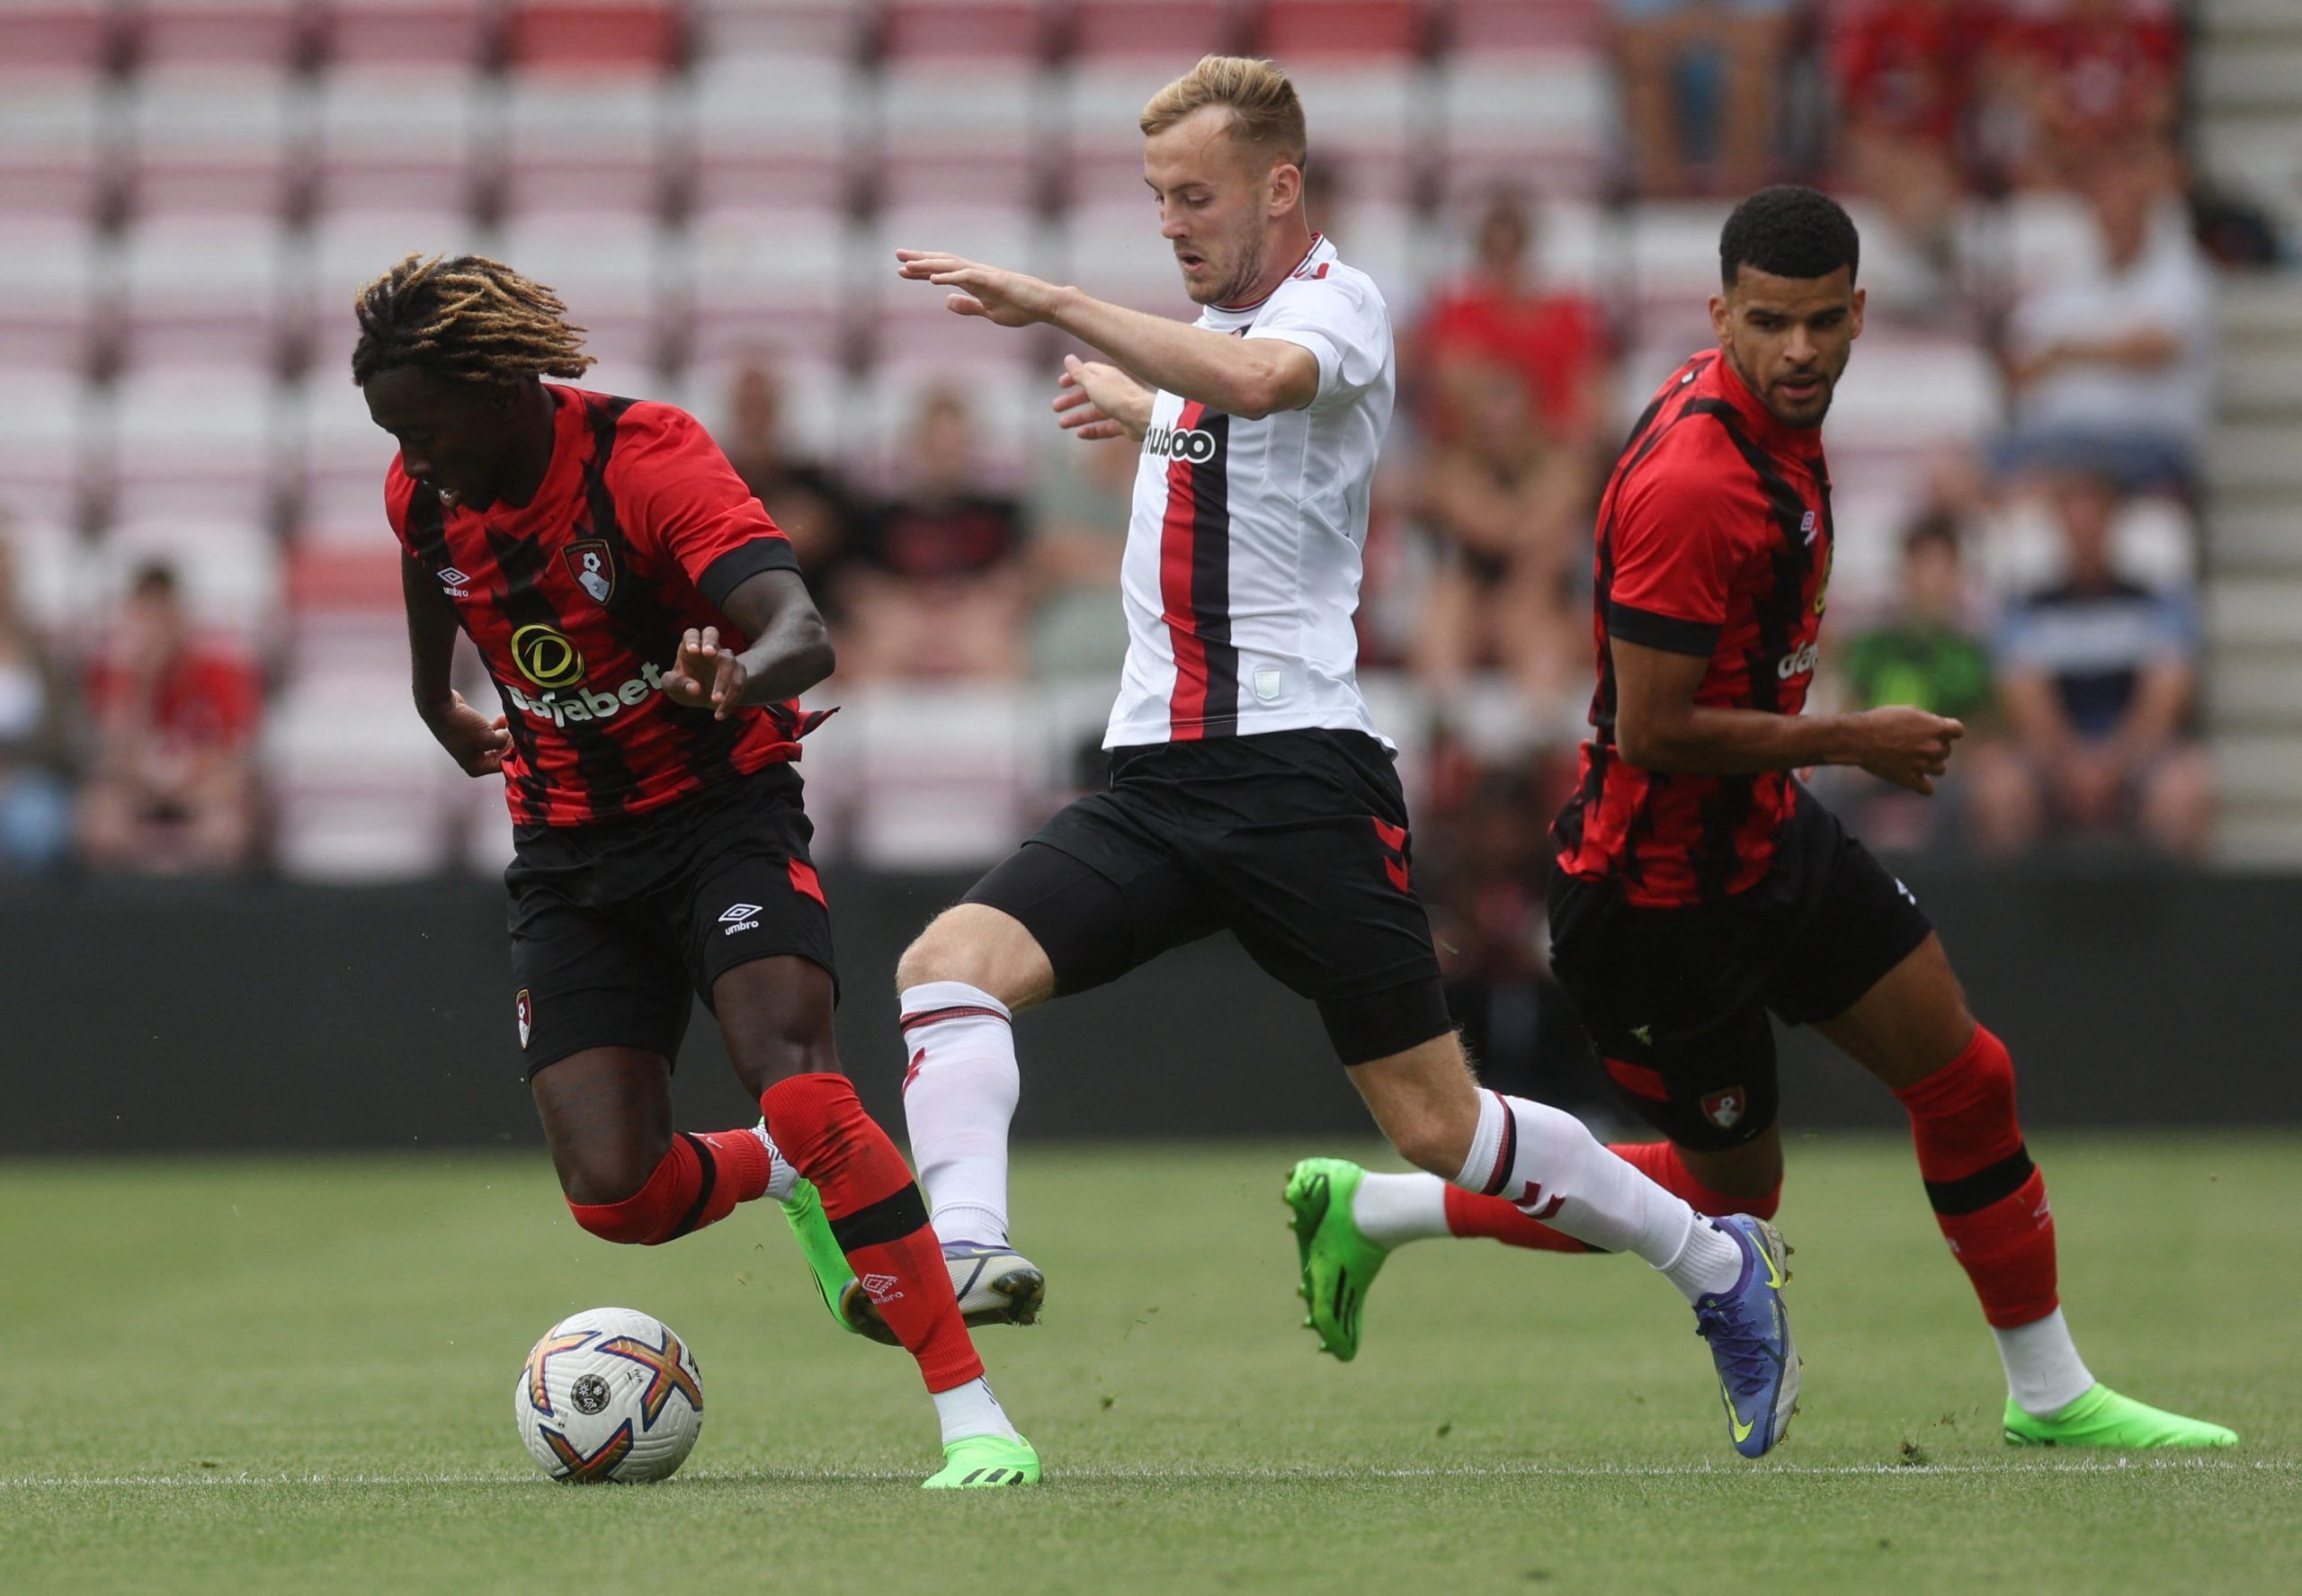 Soccer Football - Pre Season Friendly - AFC Bournemouth v Bristol City - Vitality Stadium, Bournemouth, Britain - July 23, 2022 AFC Bournemouth's Jordan Zemura in action with Bristol City's Alex Scott Action Images via Reuters/Paul Childs